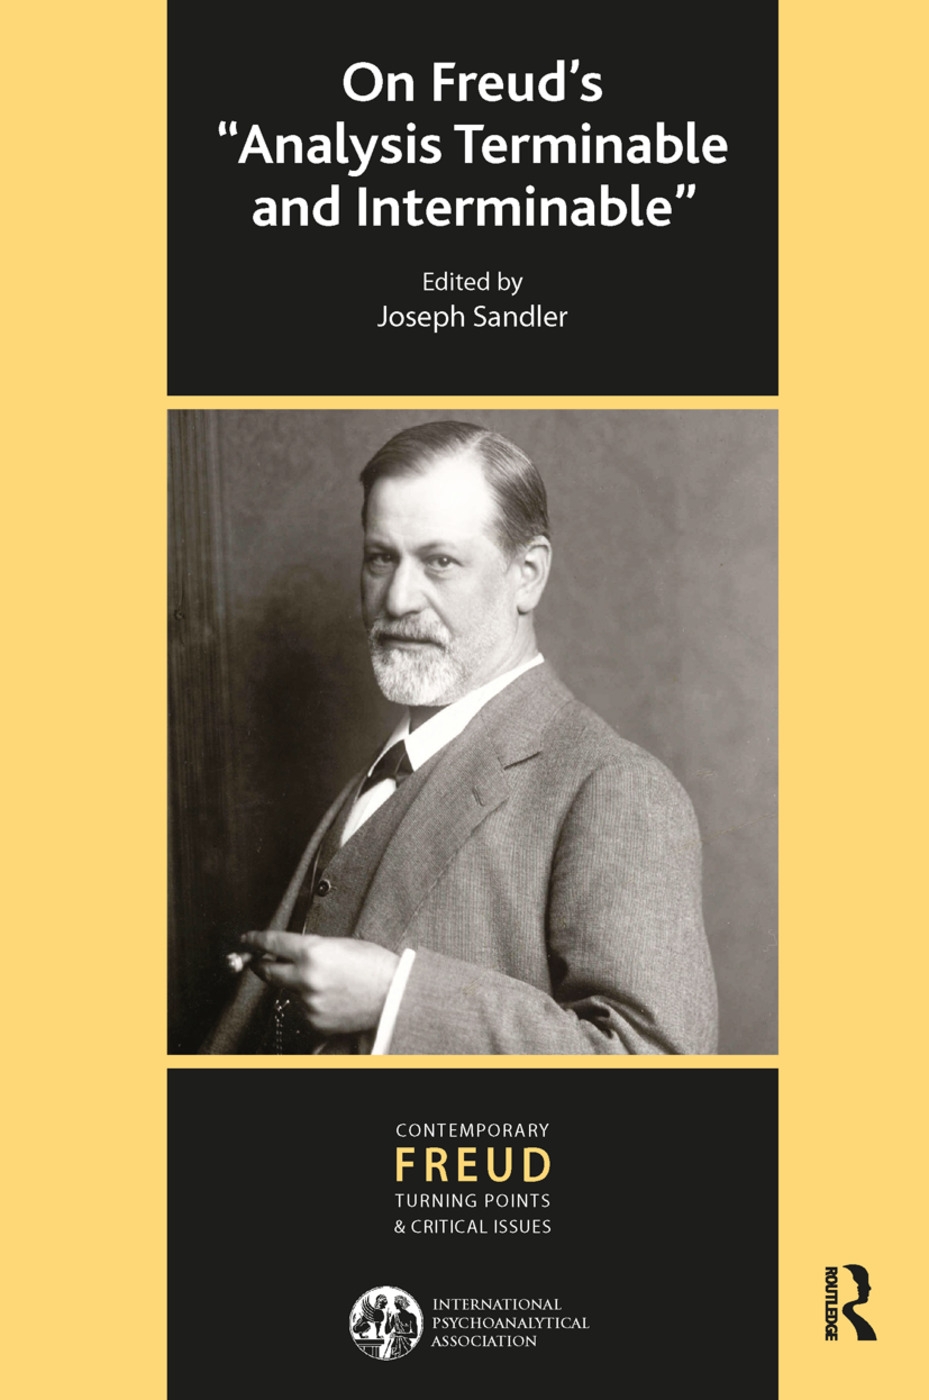 On Freud’s Analysis Terminable and Interminable